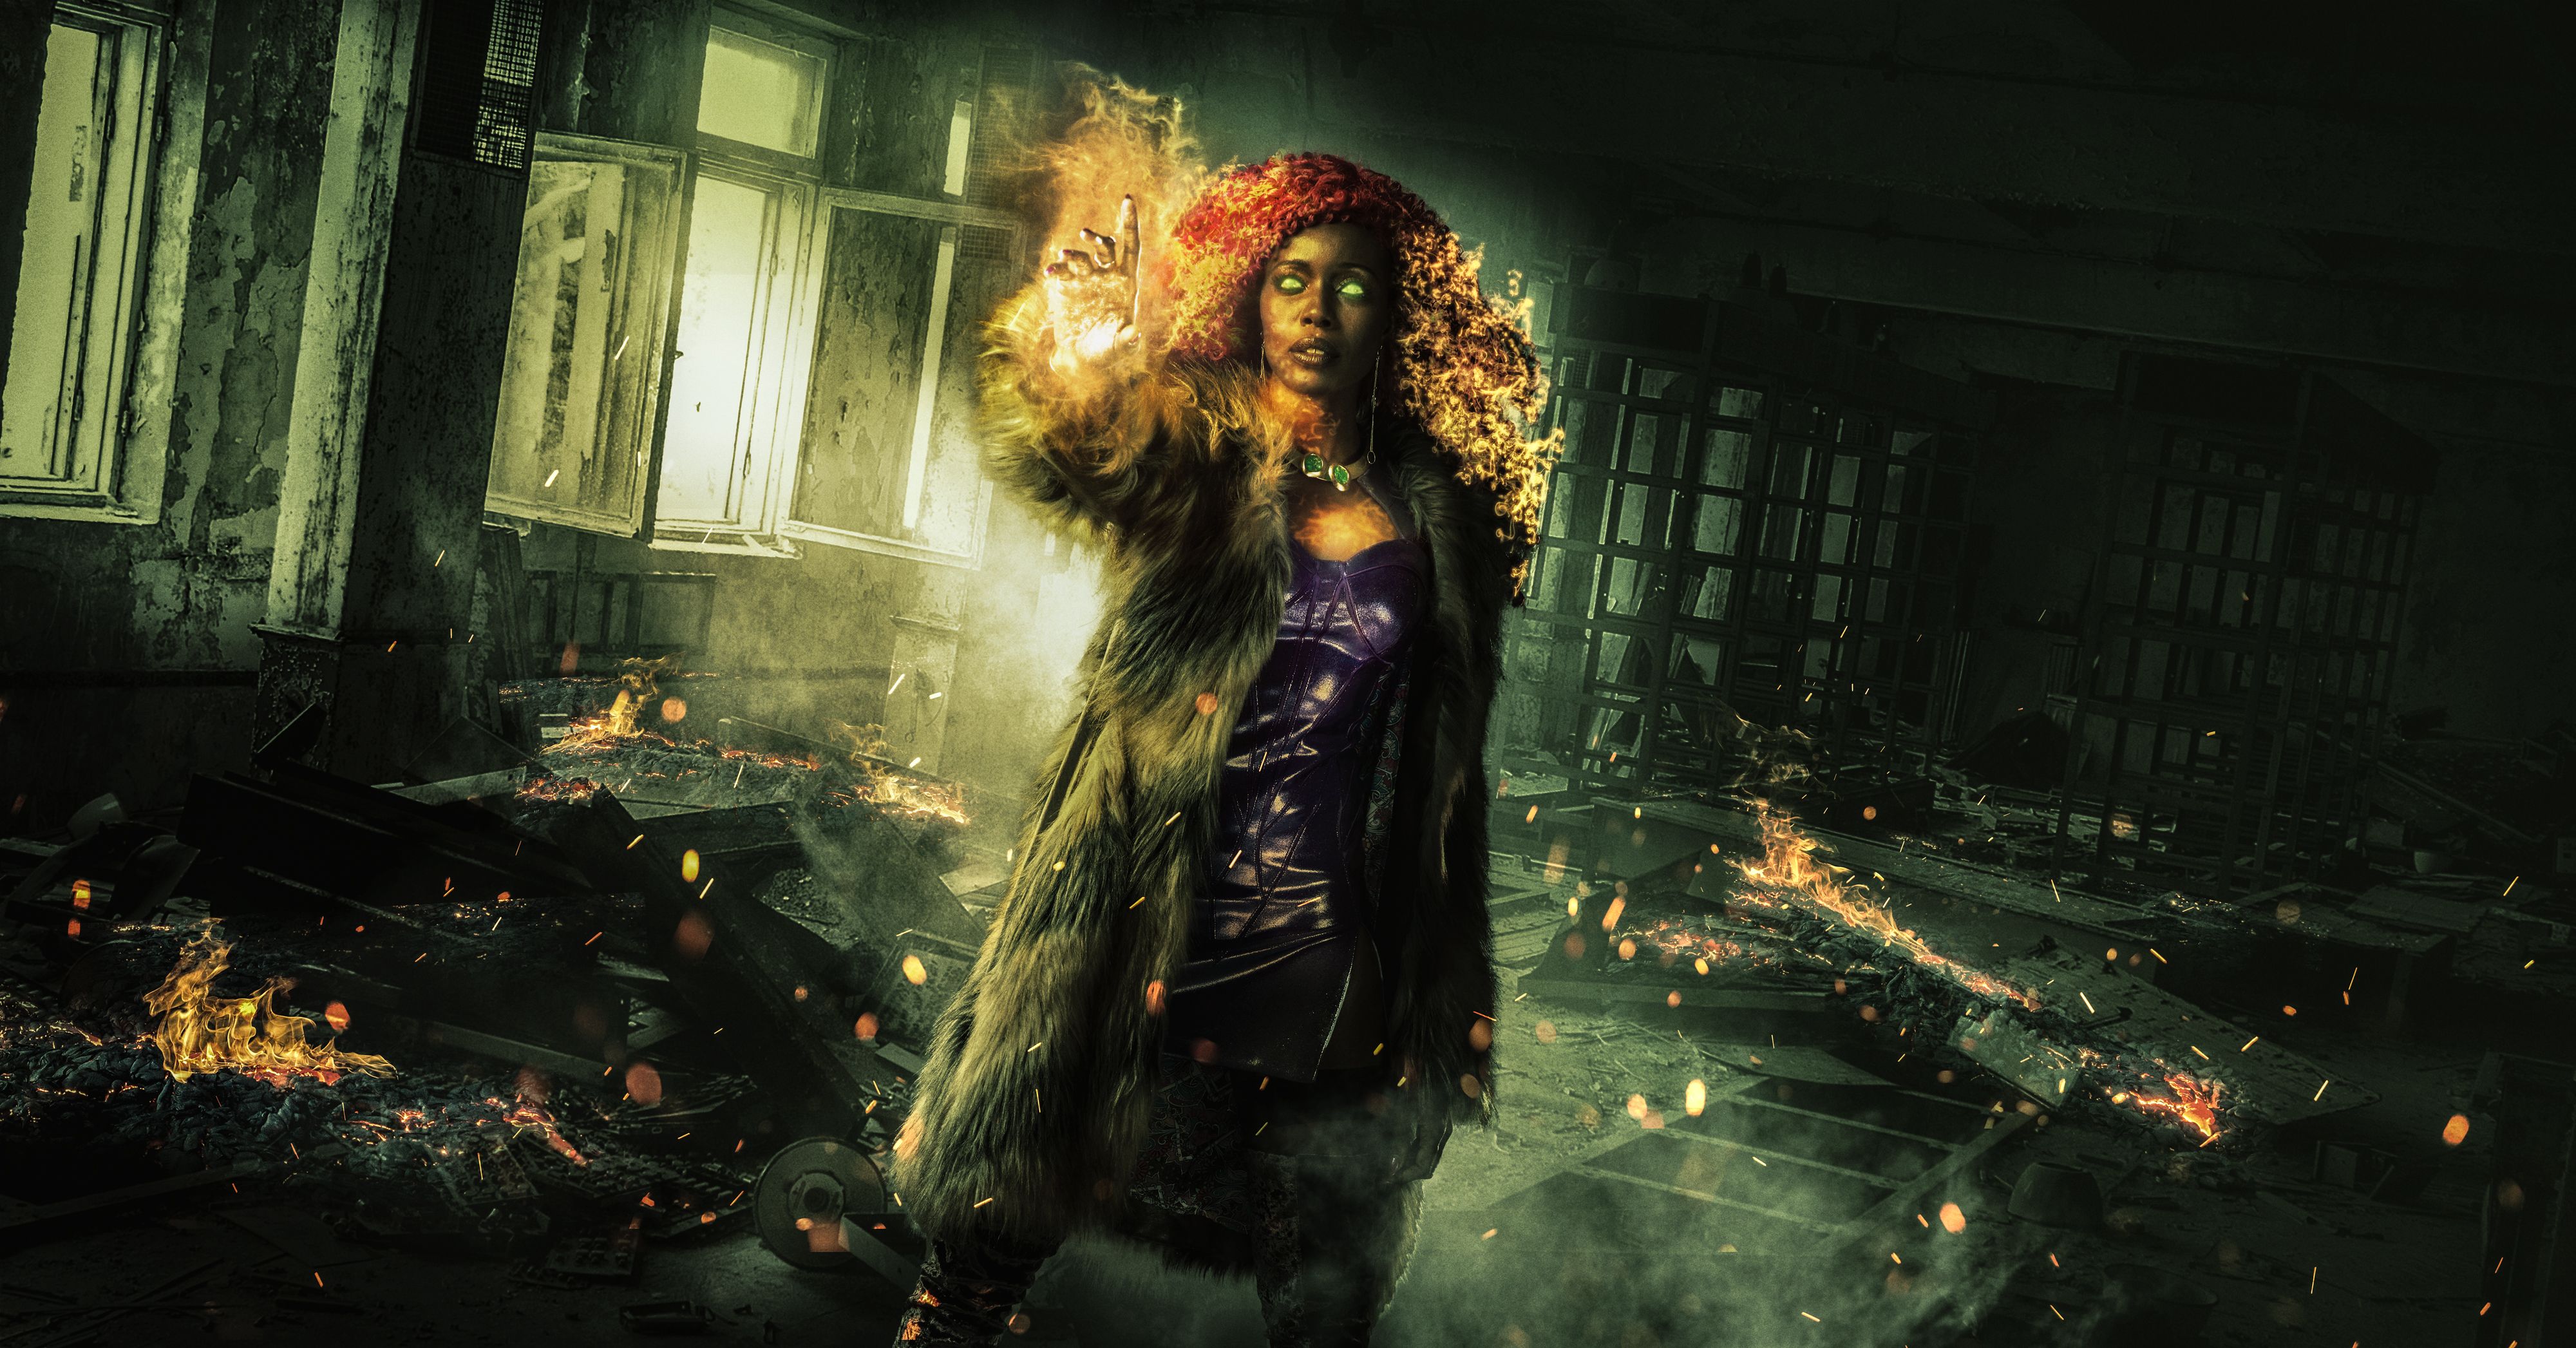 Wallpaper Starfire, Titans, DC Comics, Anna Diop, 4K, TV Series,. Wallpaper for iPhone, Android, Mobile and Desktop